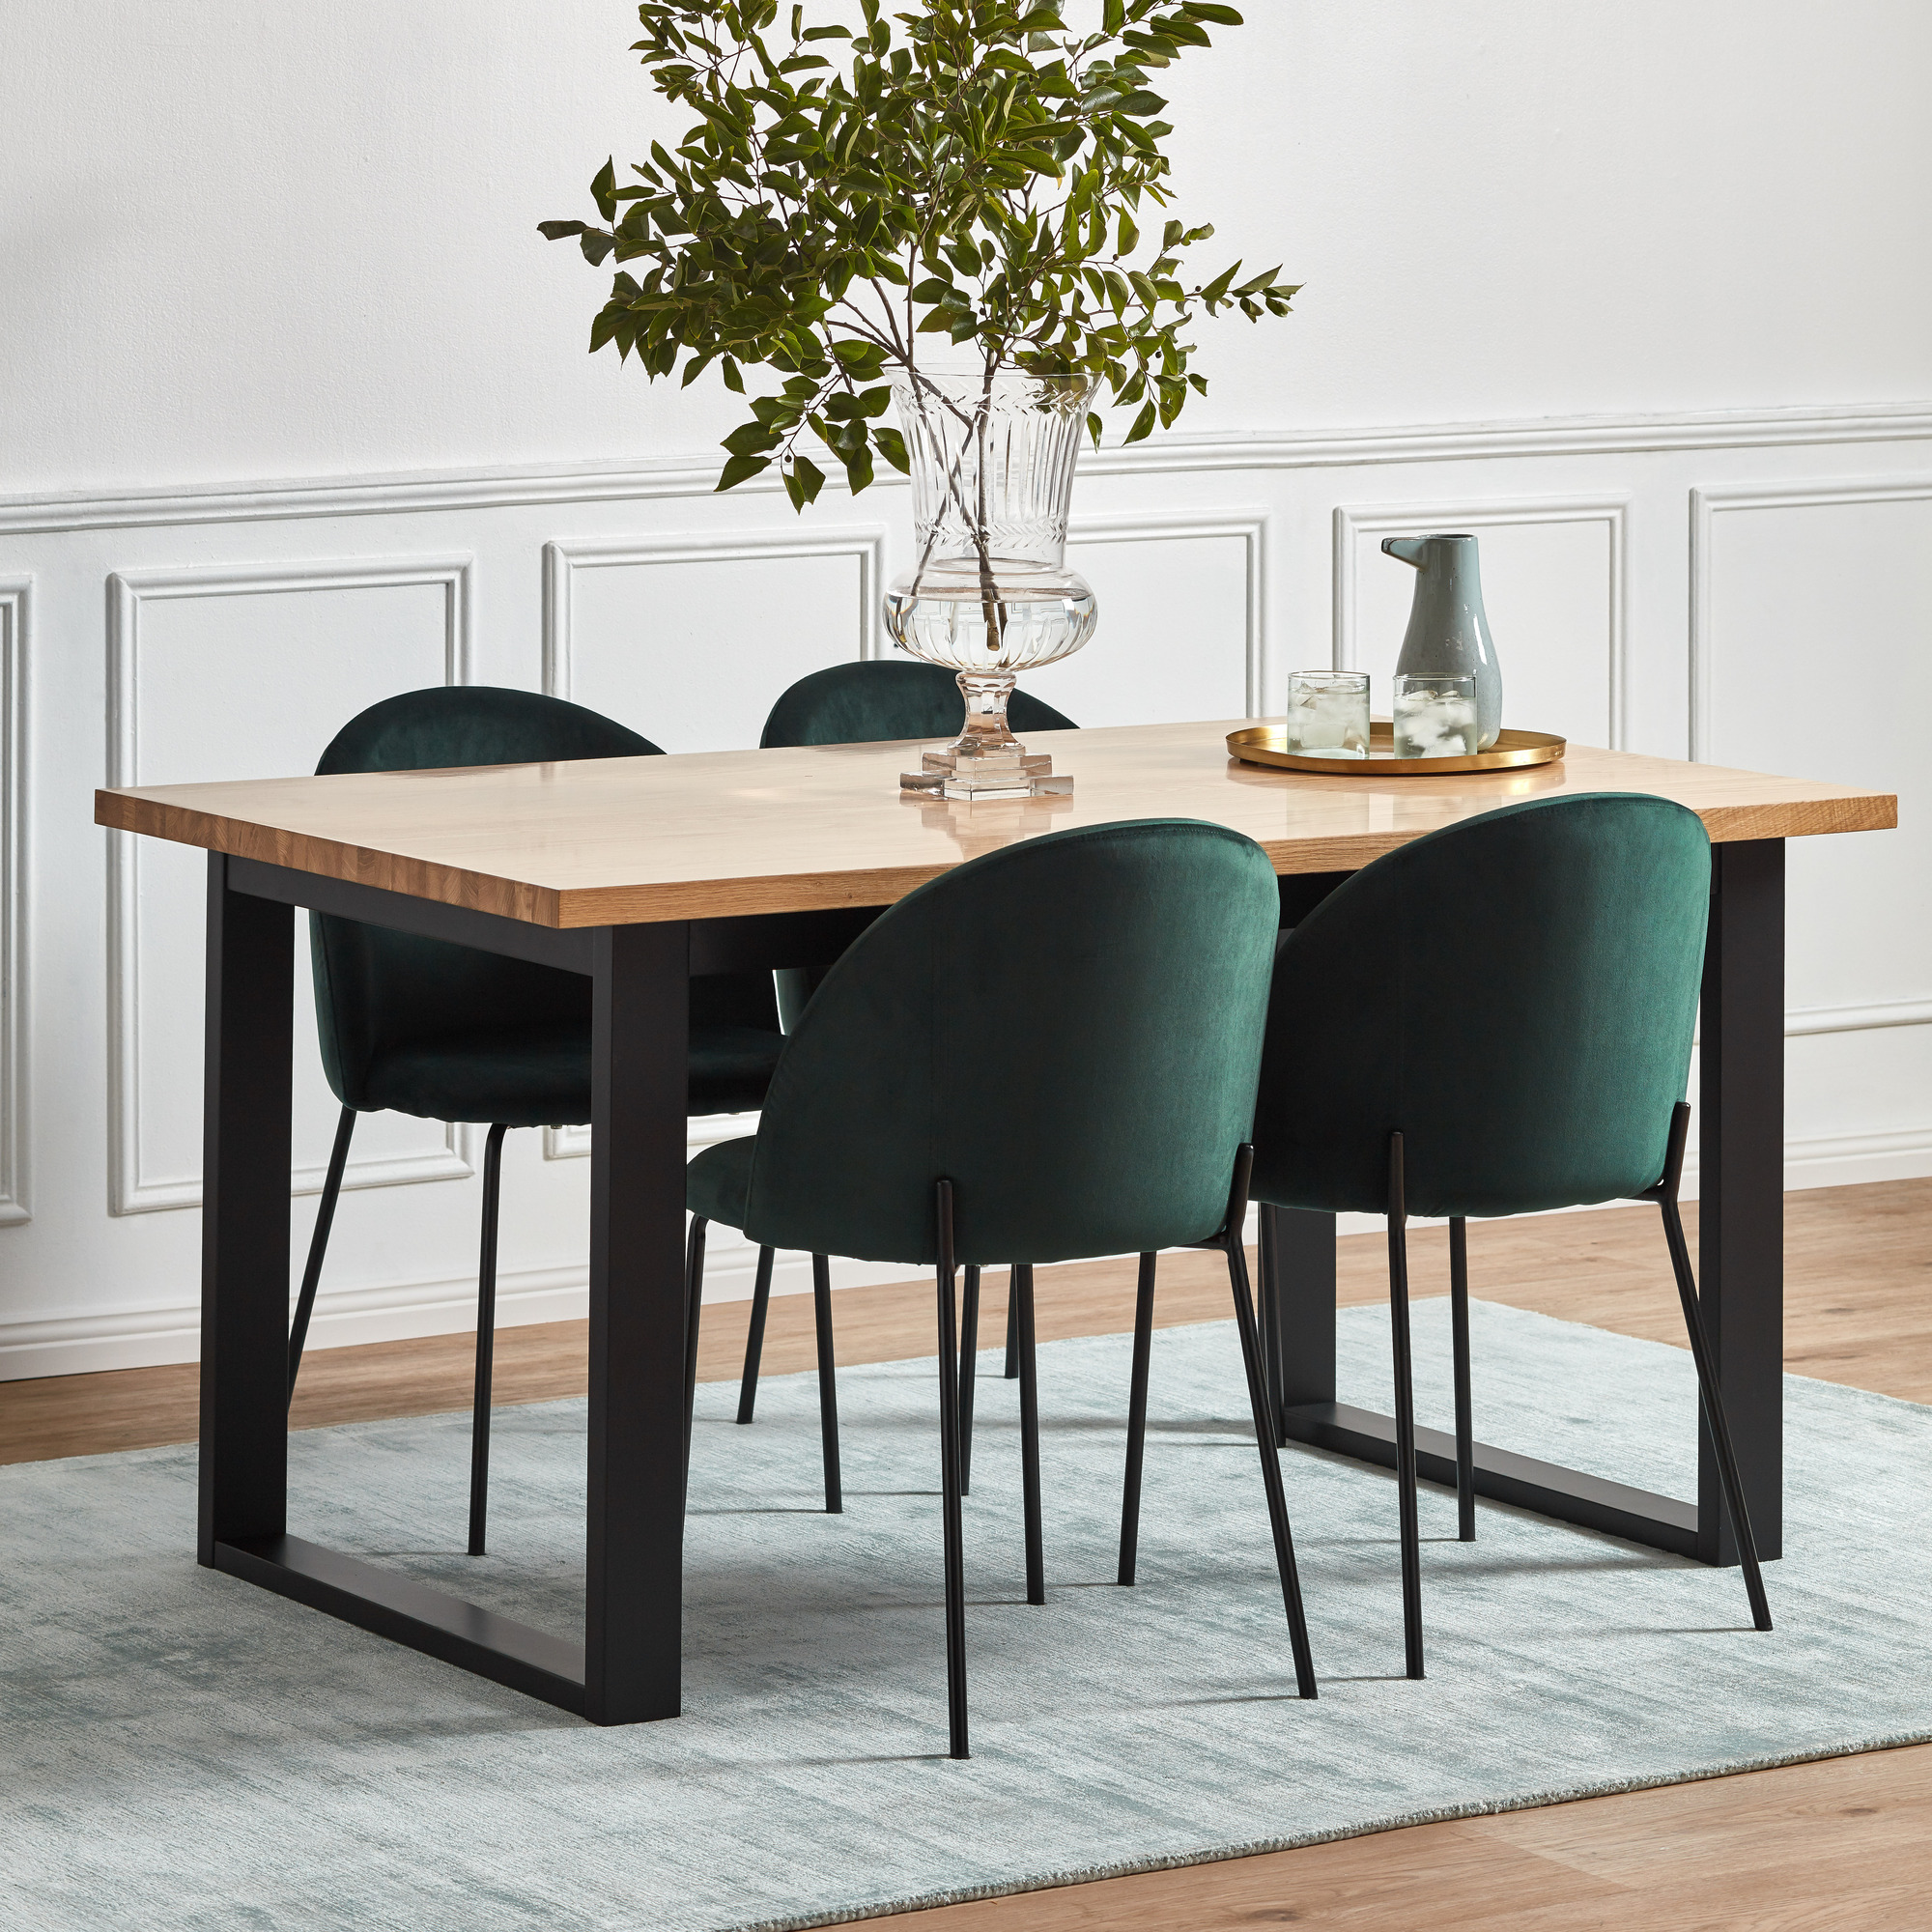 1000mm Round Wooden Nesting Dining Table Set For Green Upholstered ...